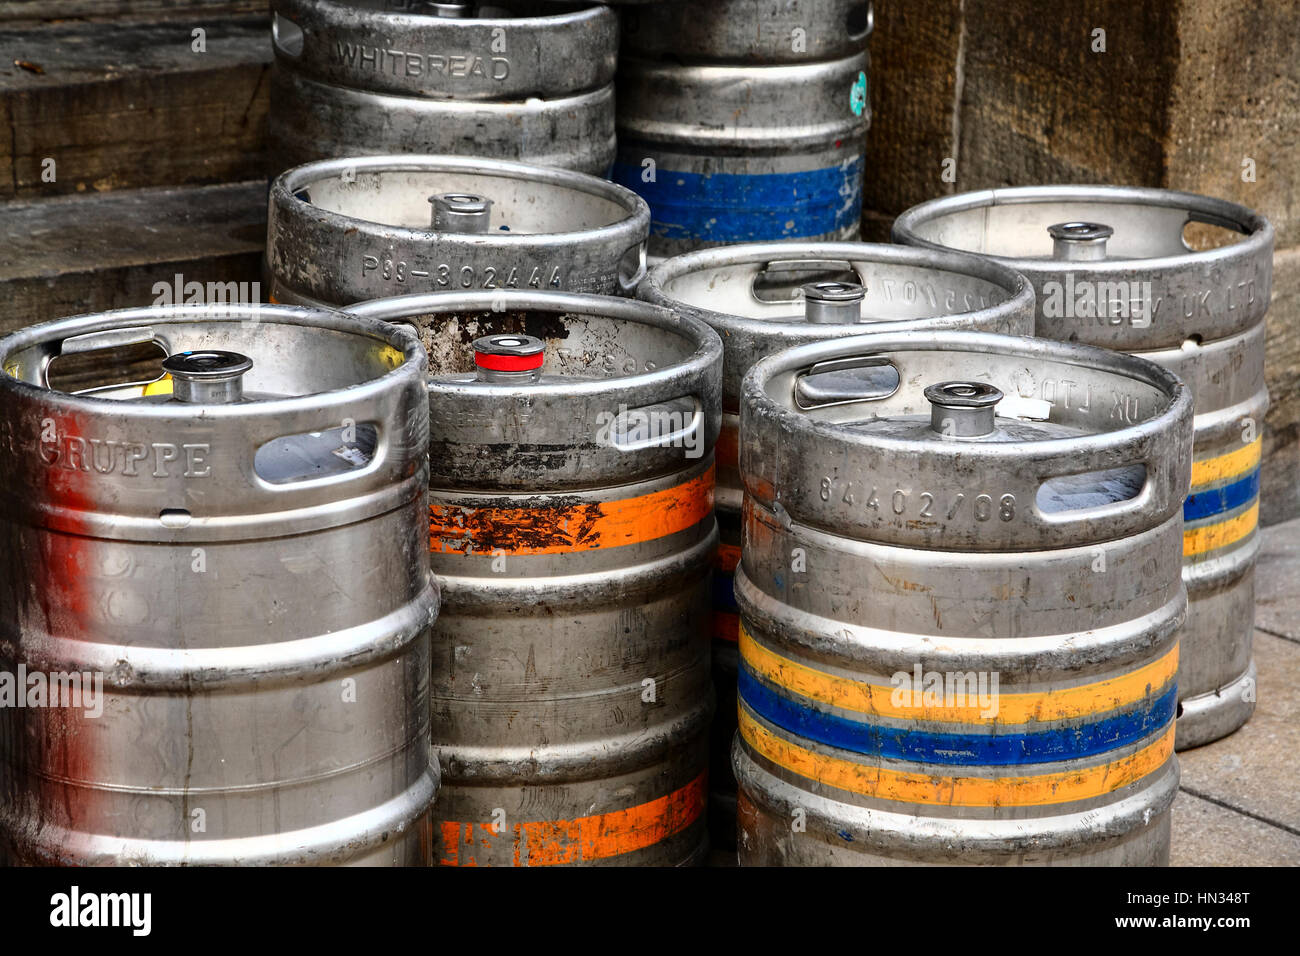 Aluminium beer real ale,lager kegs (barrels) stacked on the pavement Stock Photo: 133449592 - Alamy